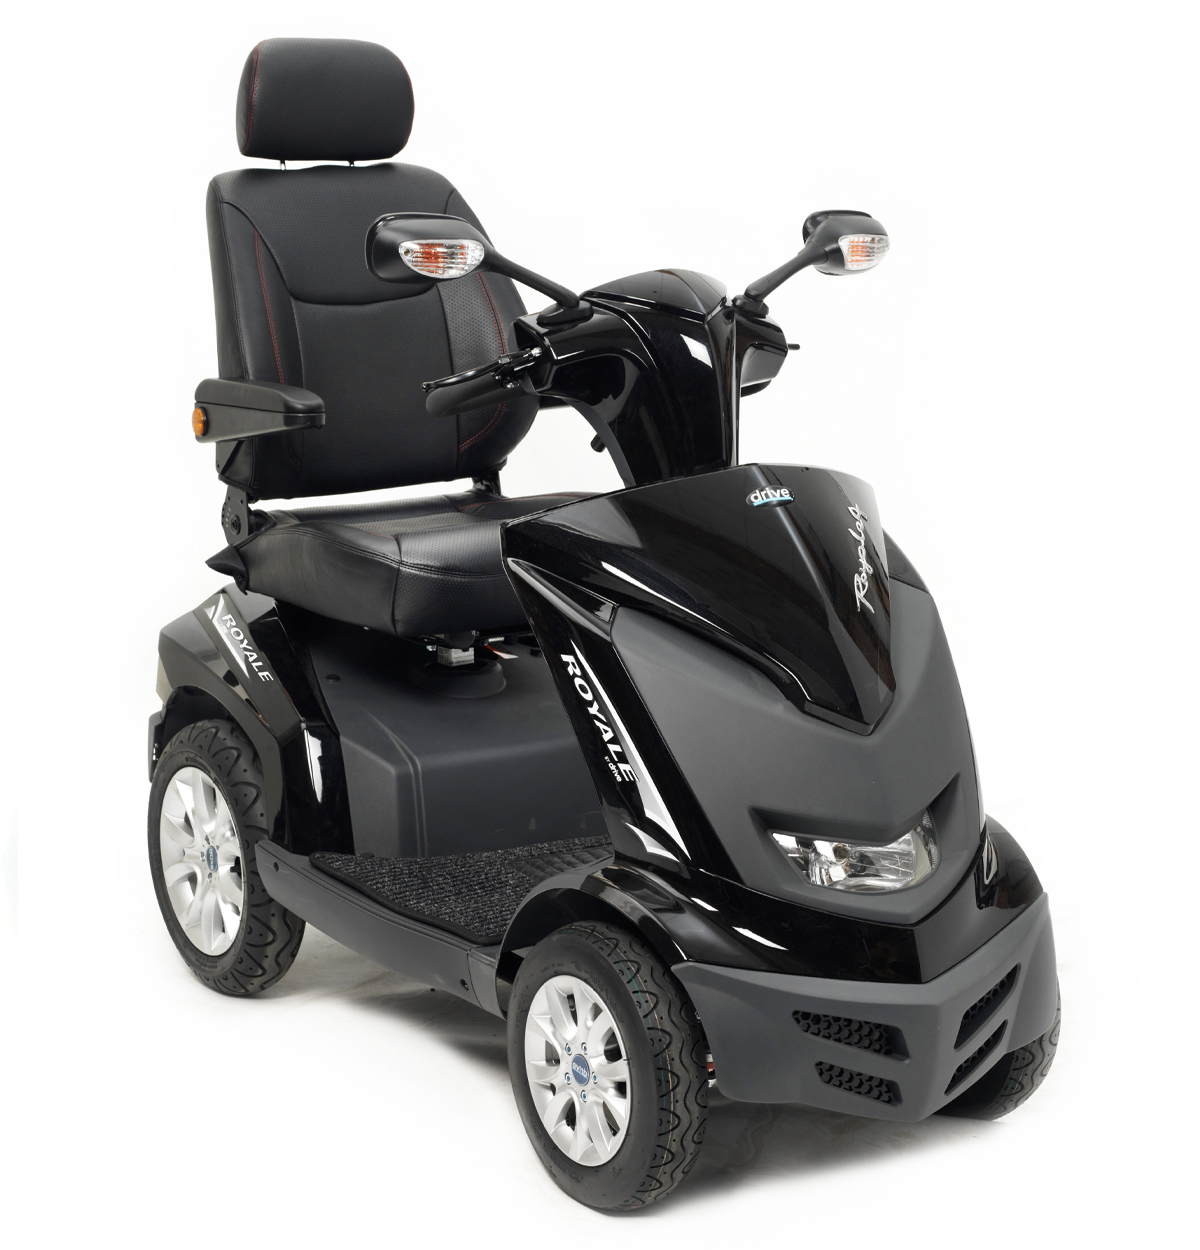 Drive, Royale 4 Mobility Scooter